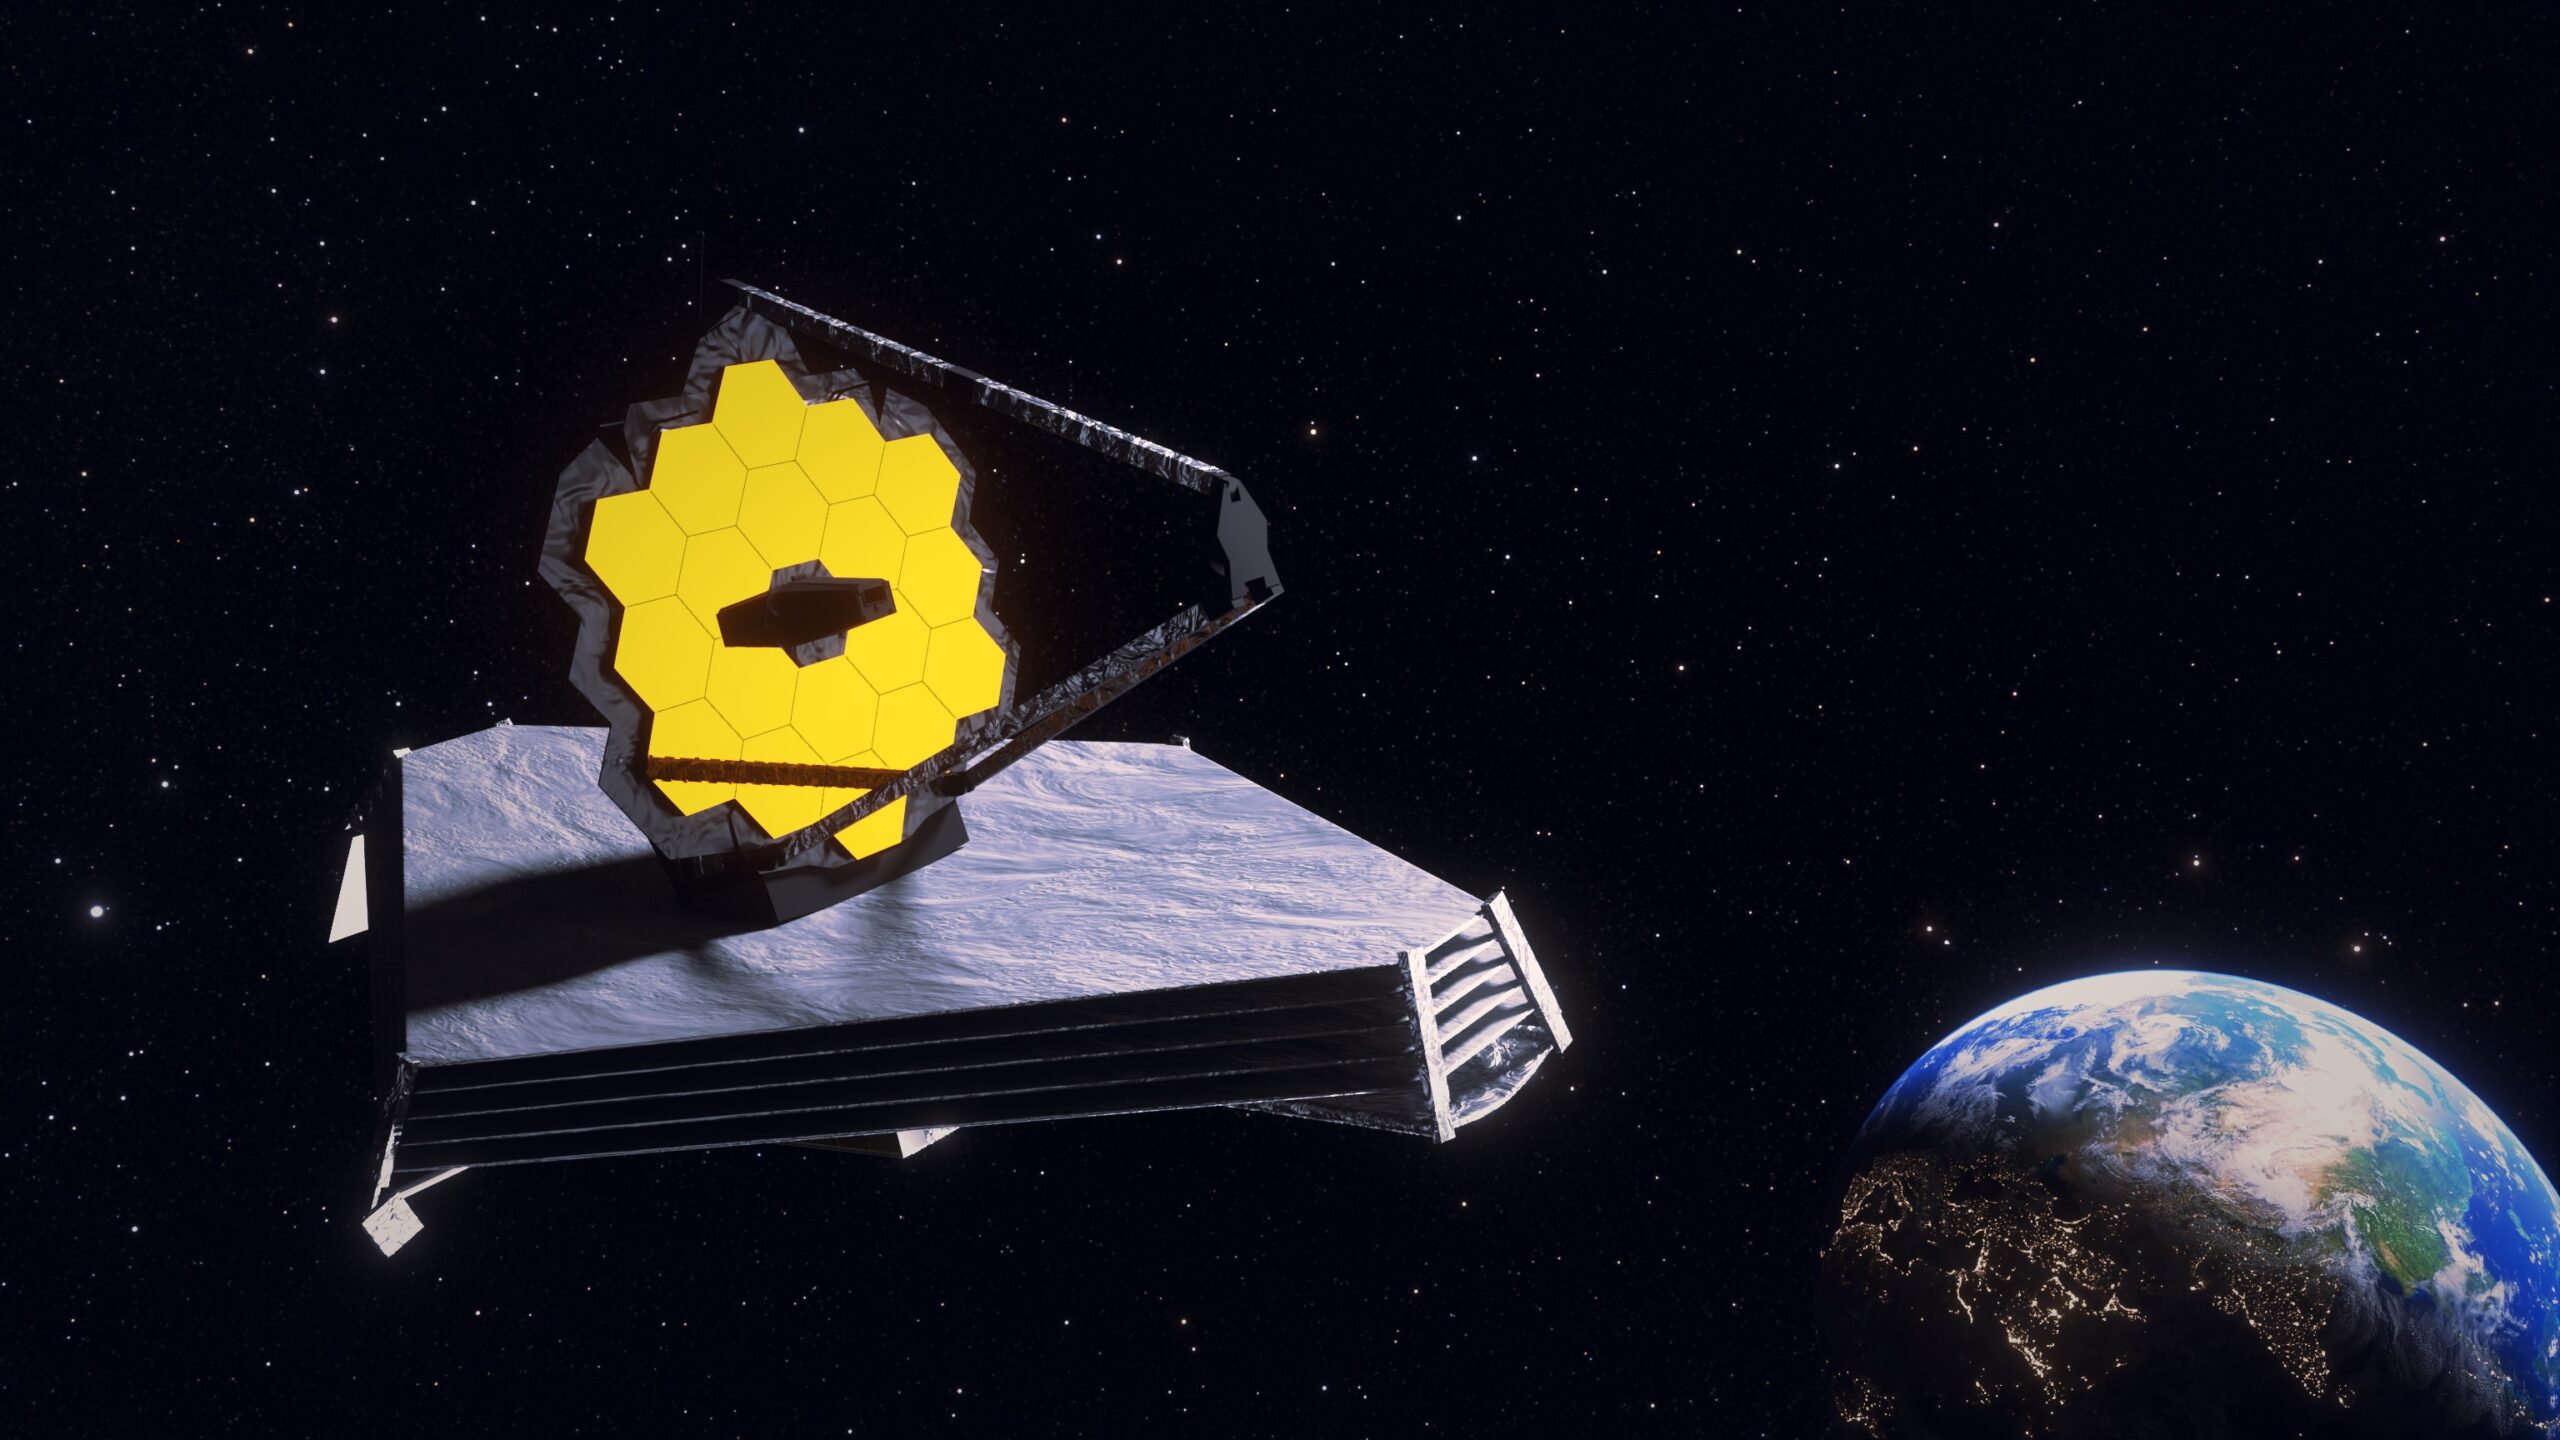 The James Webb Telescope seen in space with the Earth in the background